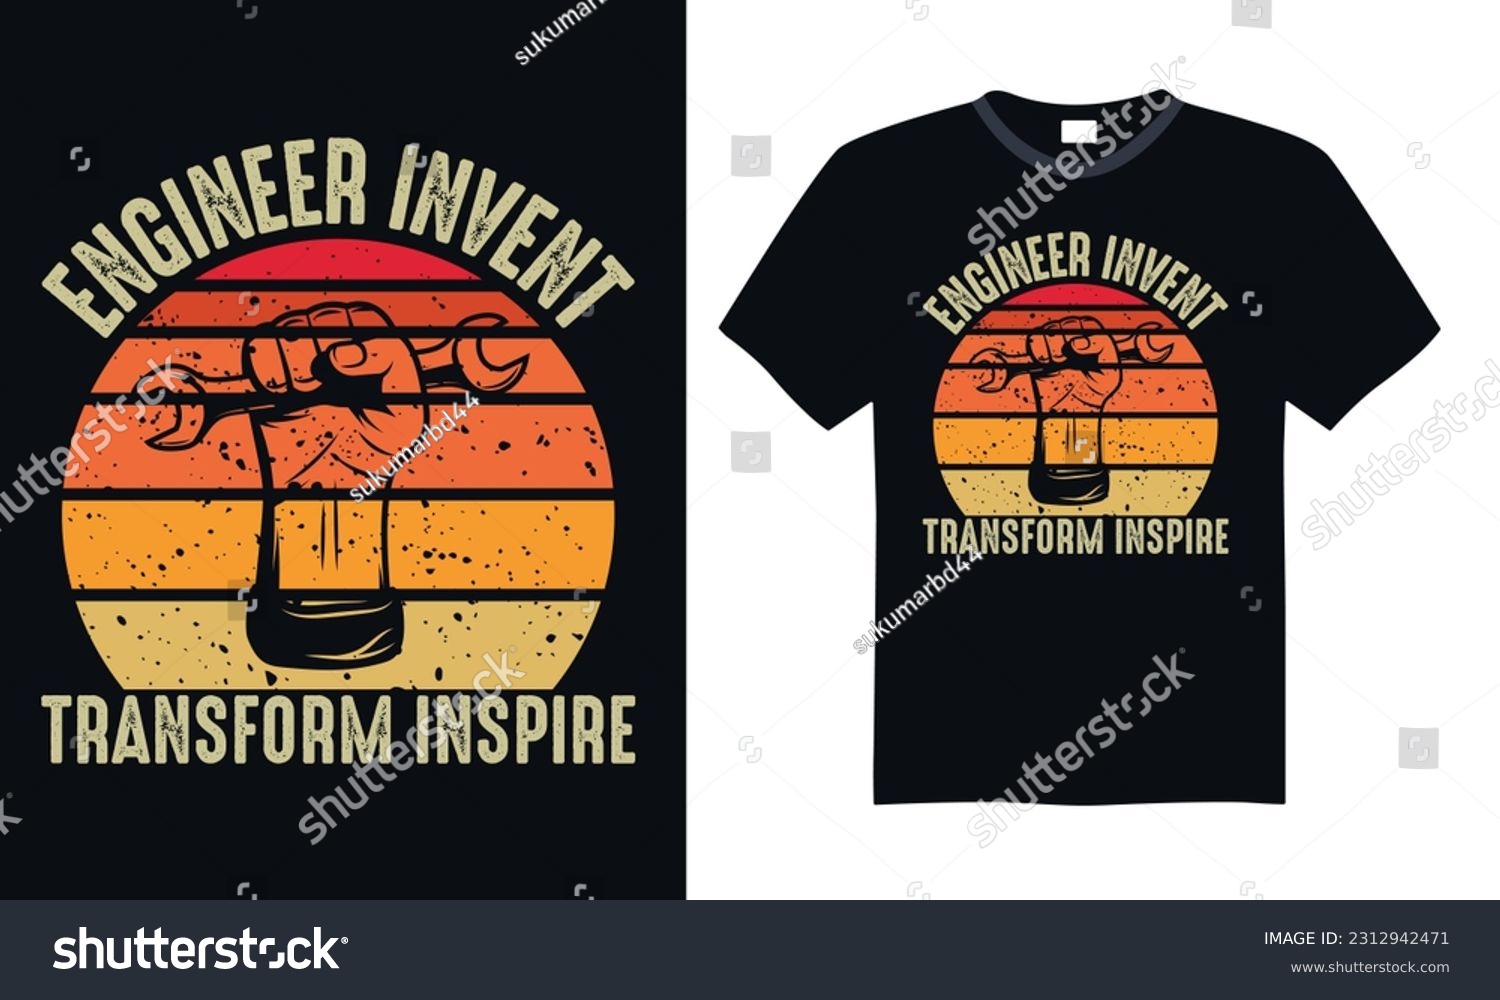 SVG of Engineer Invent Transform Inspire - Engineering T-shirt Design, SVG Files for Cutting, Handmade calligraphy vector illustration, Hand written vector sign svg